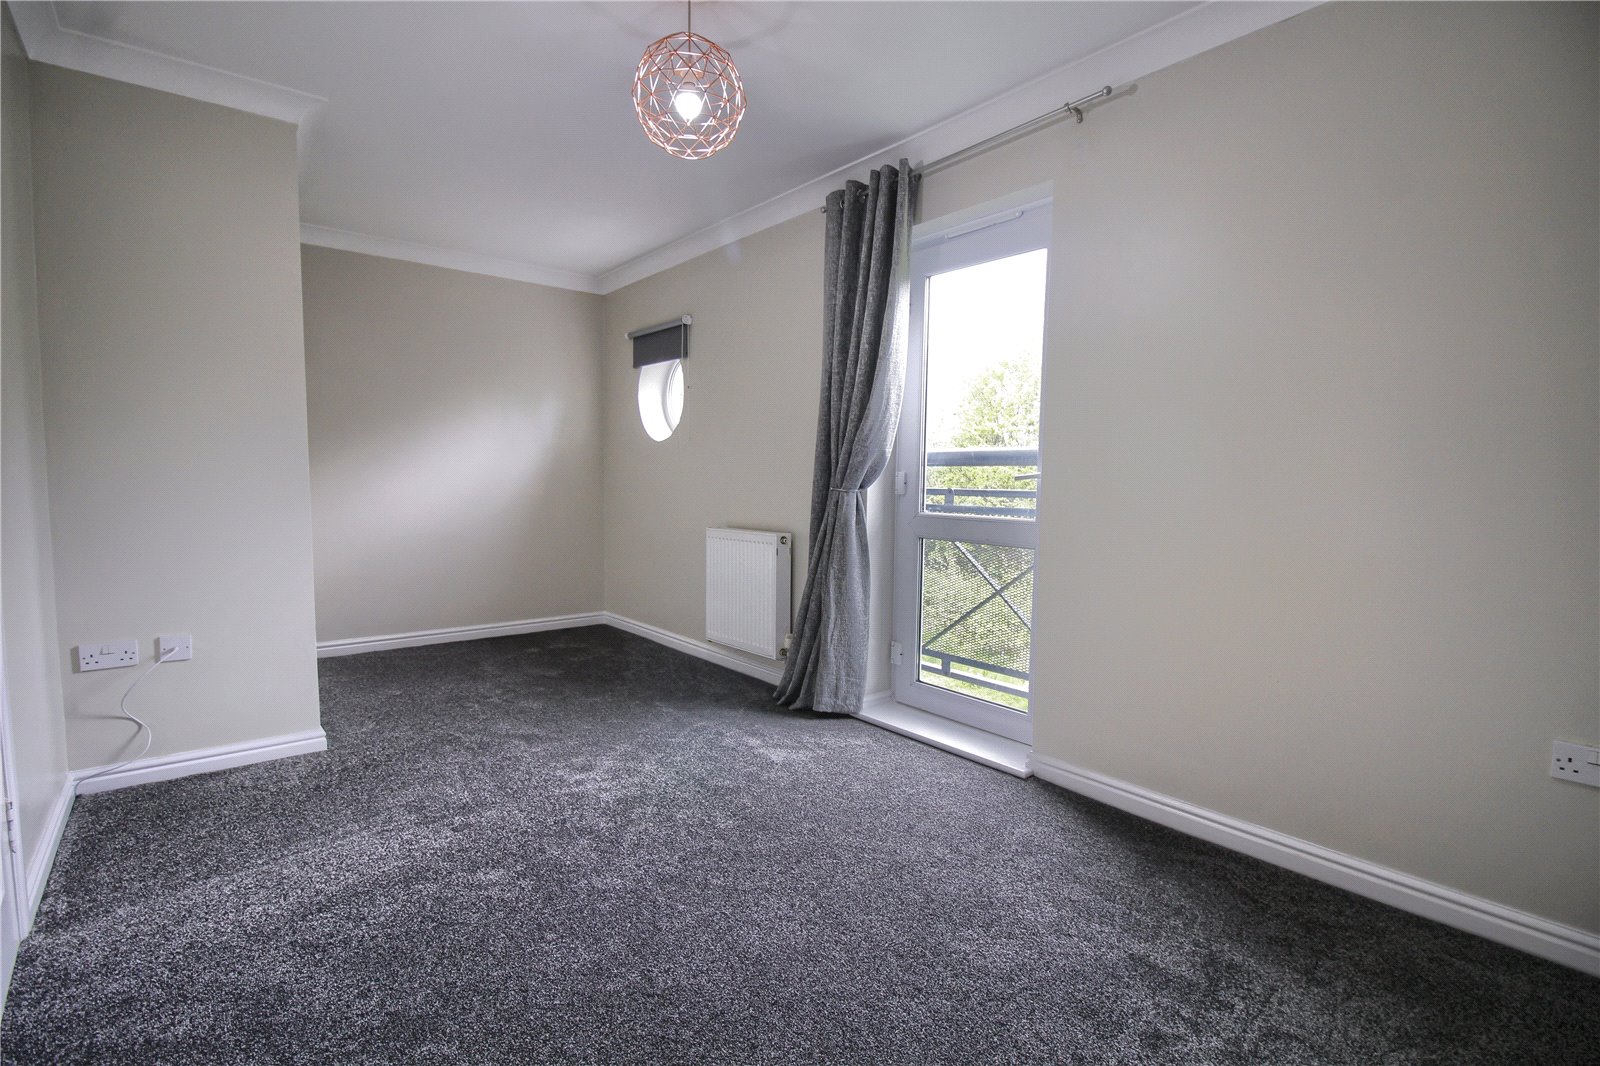 2 bed apartment to rent in Brusselton Court, Stockton-on-Tees  - Property Image 3